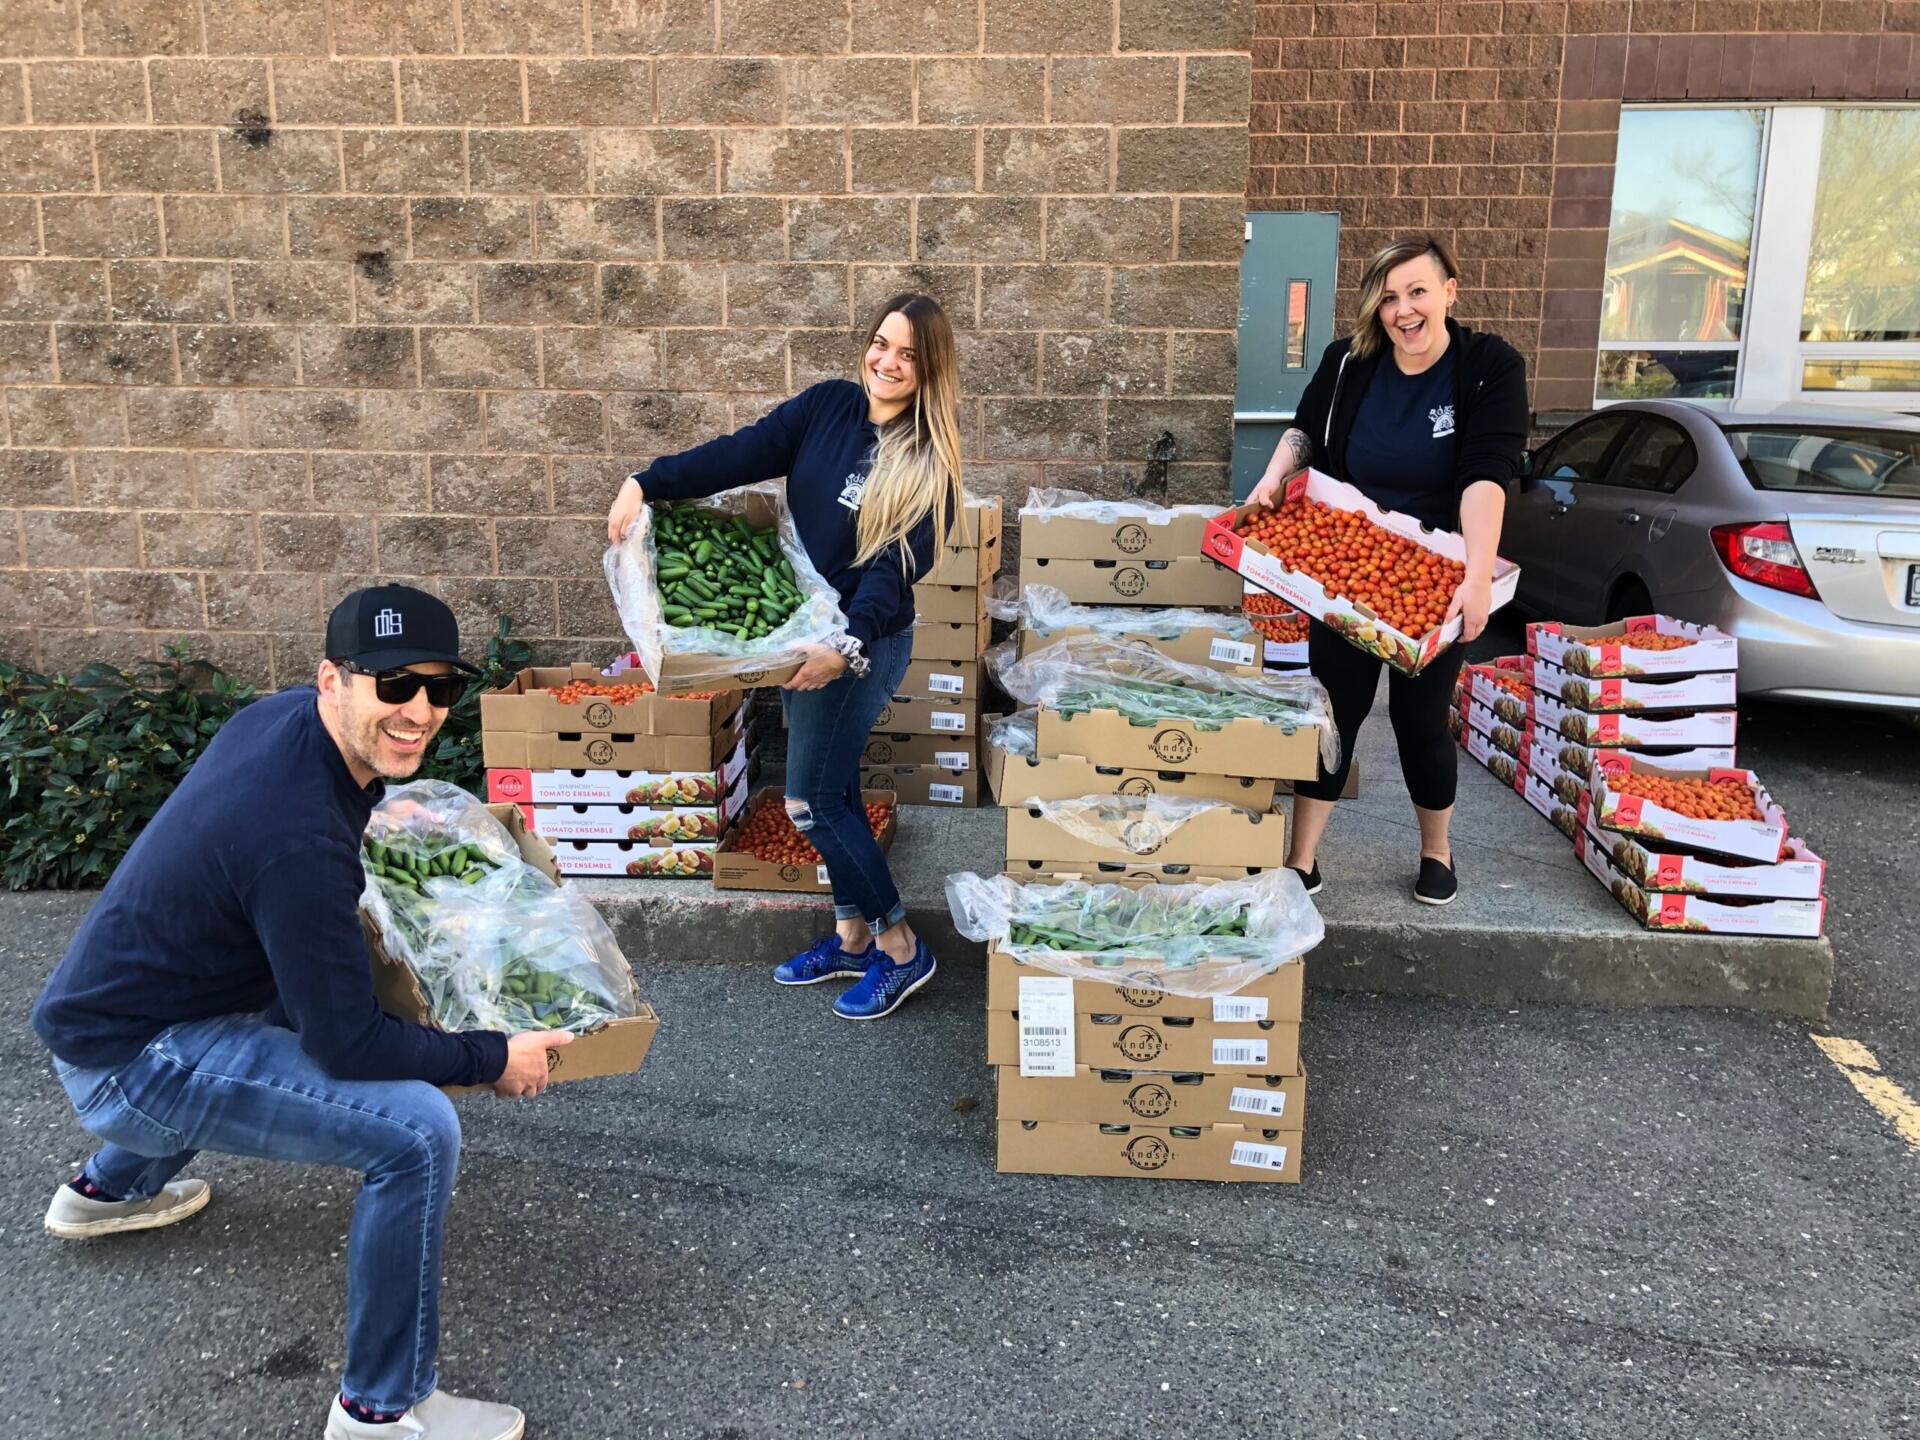 Vancouver food runners volunteers picking up fresh produce to redistribute it to local charities donating food to the food insecure